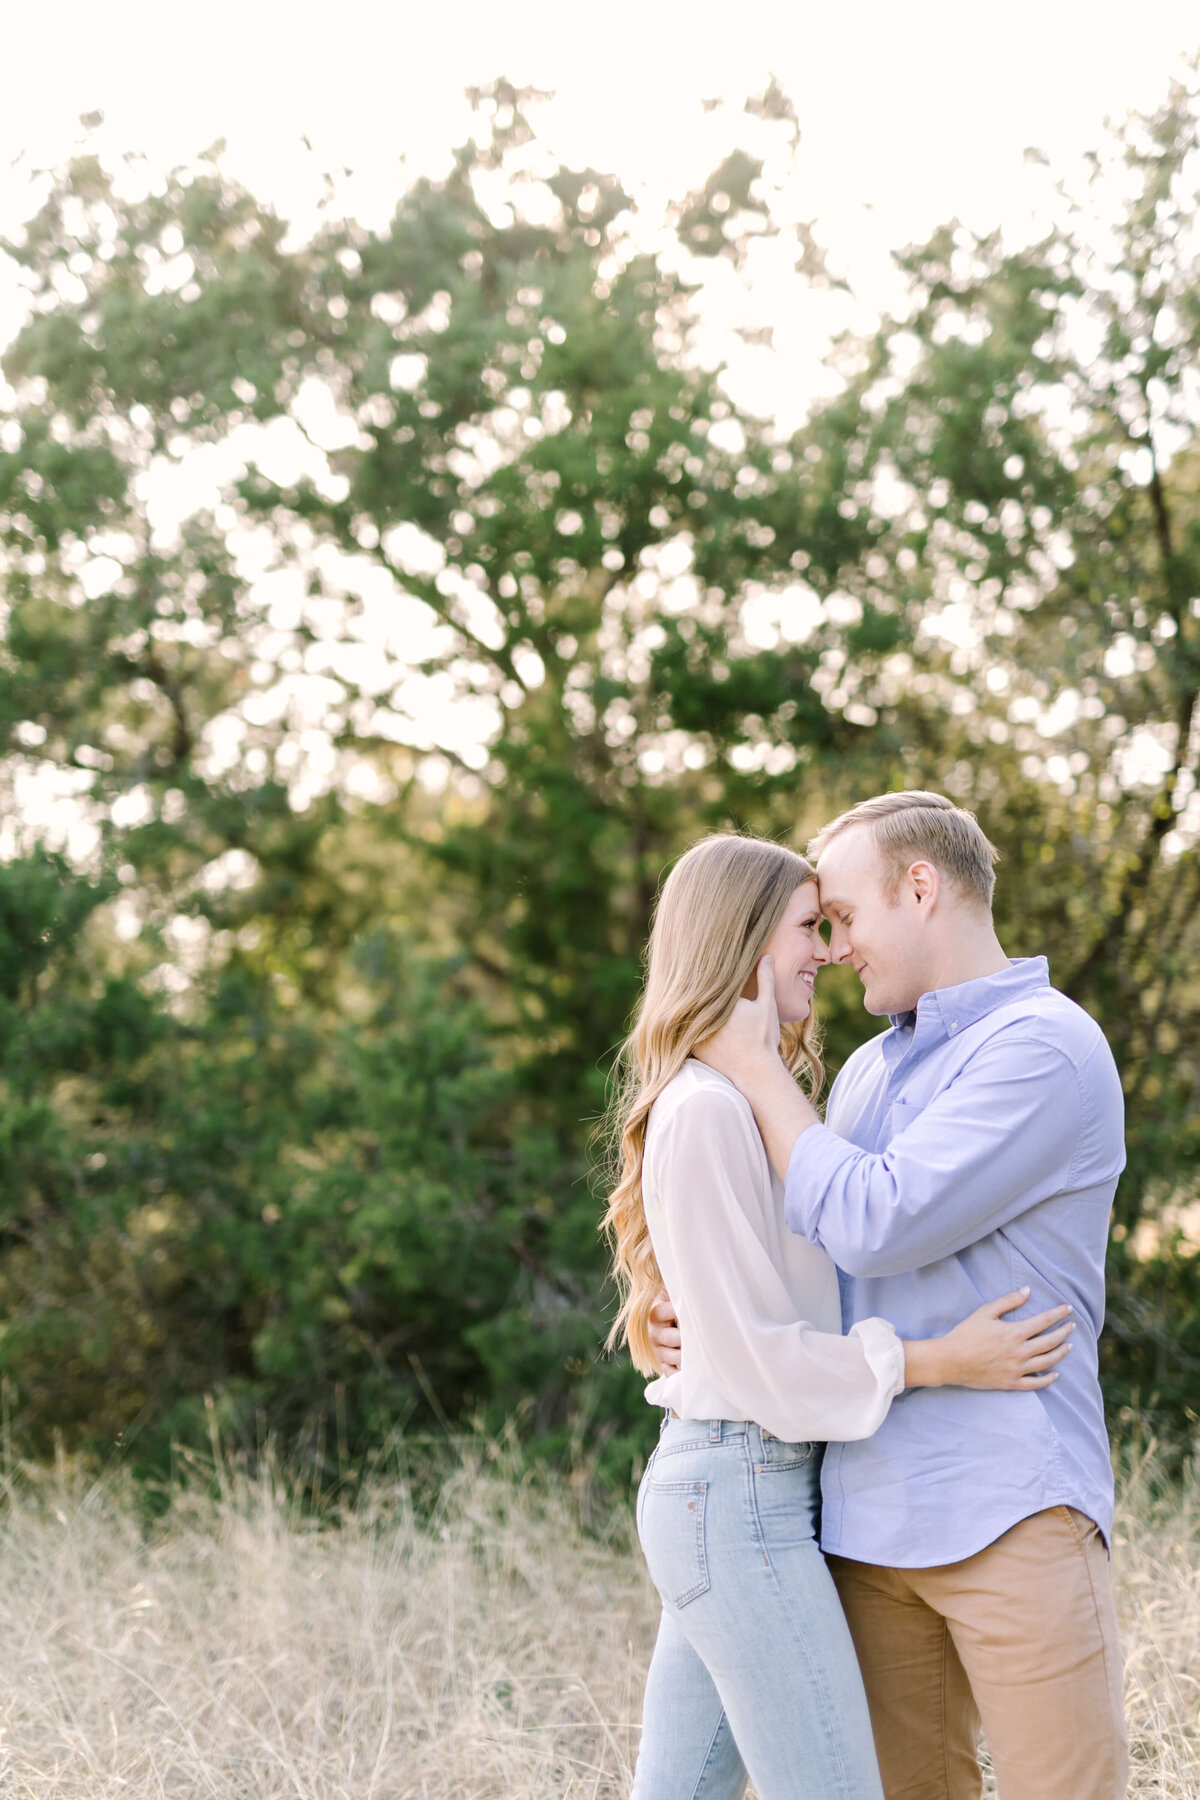 Sunset engagement session in the fields at Brushy Creek Park